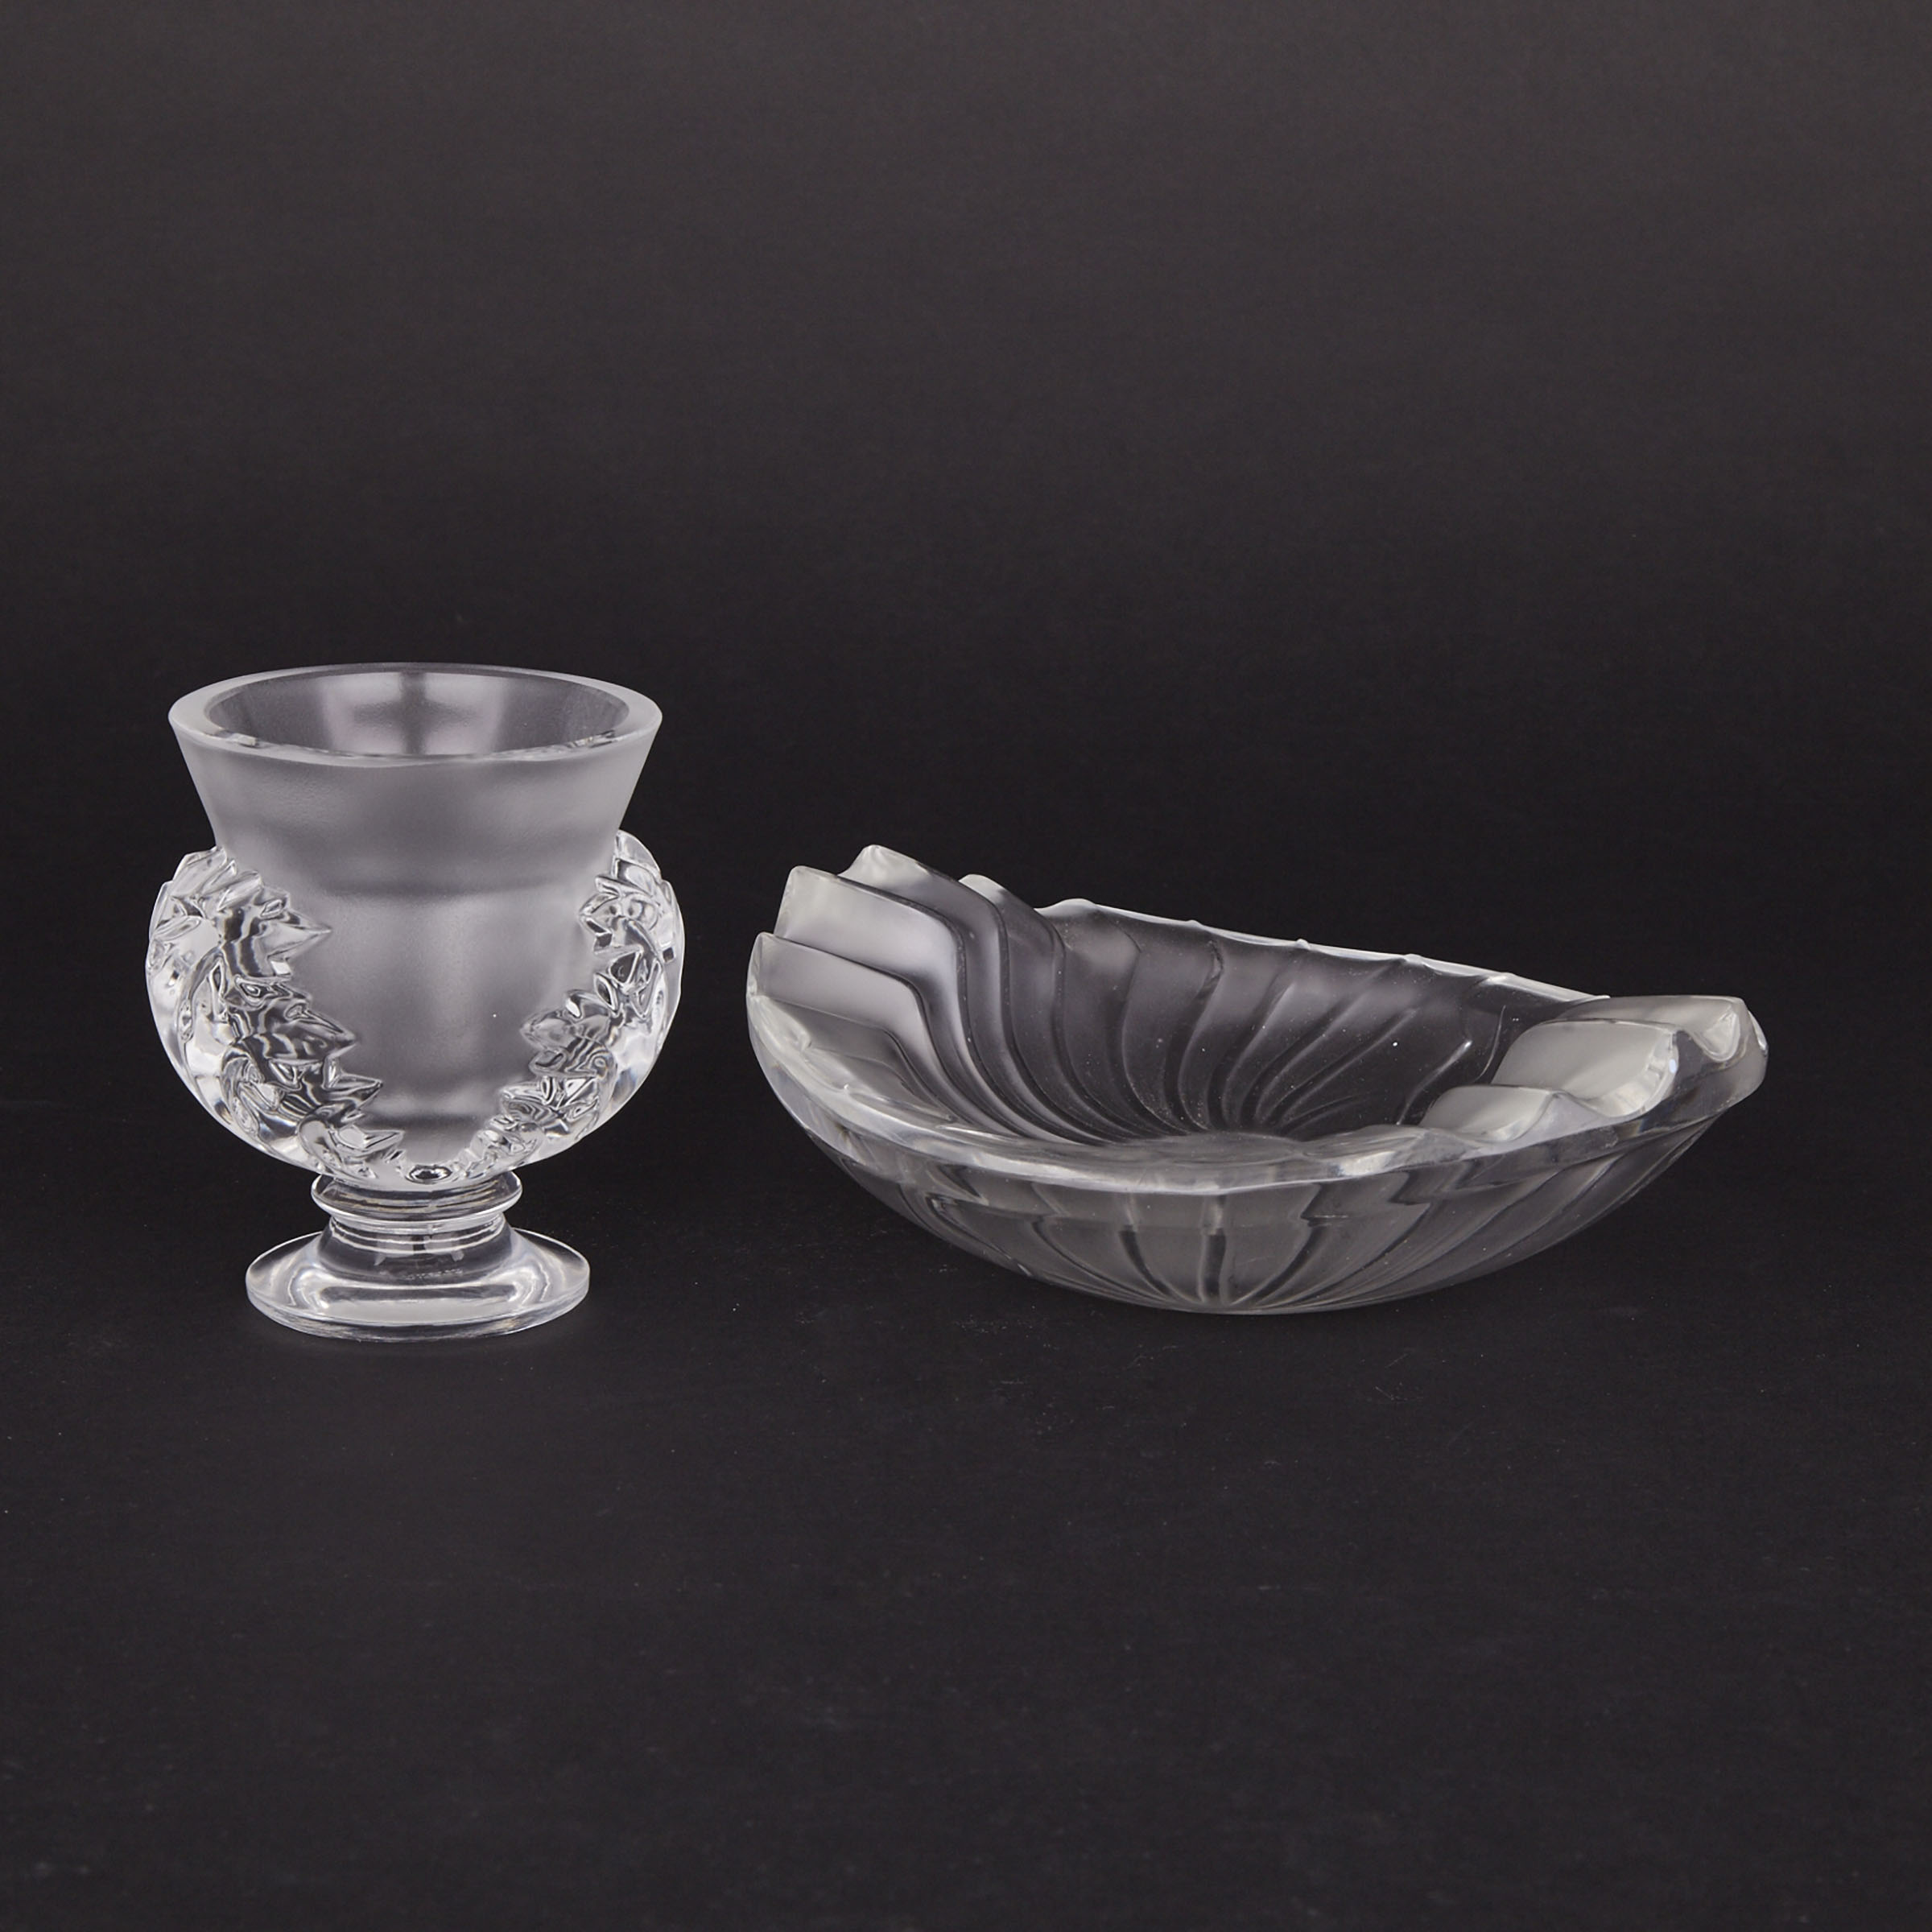 ‘St. Cloud’ and ‘Nancy’, Lalique Moulded and Frosted Glass Small Vase and Oval Dish, post-1945